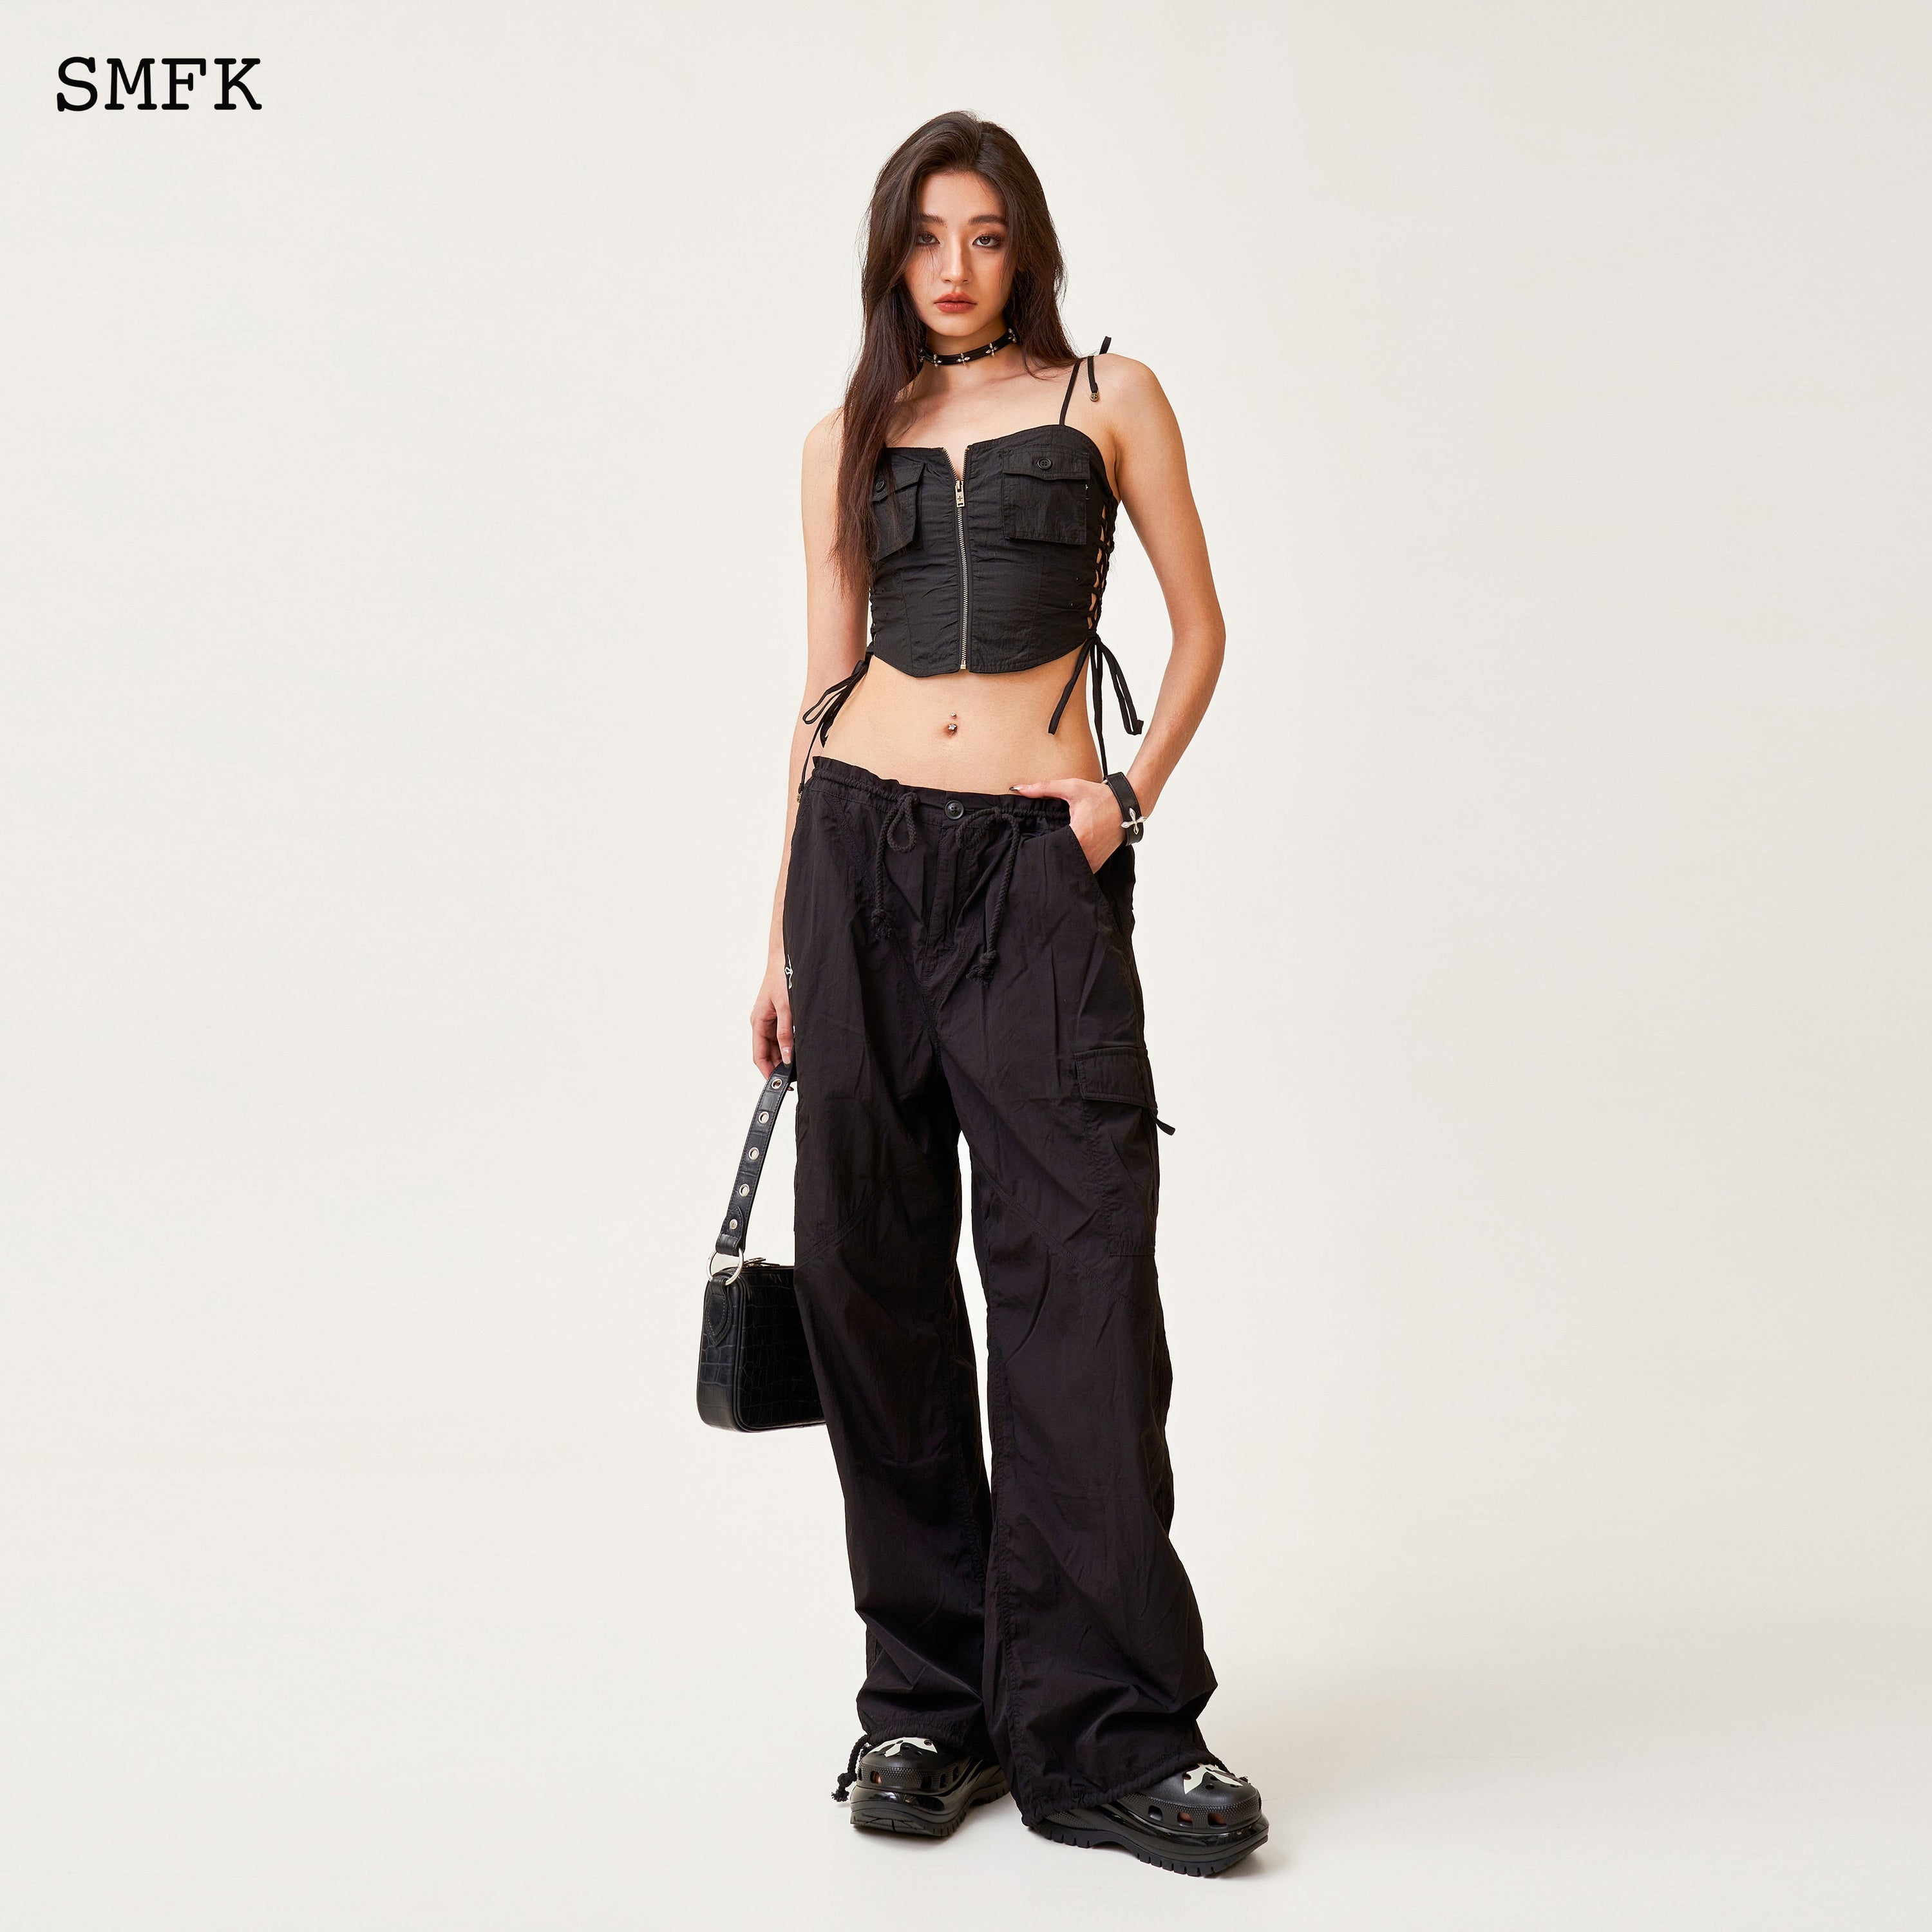 Compass Cross Classic Paratrooper Pants In Black - SMFK Official